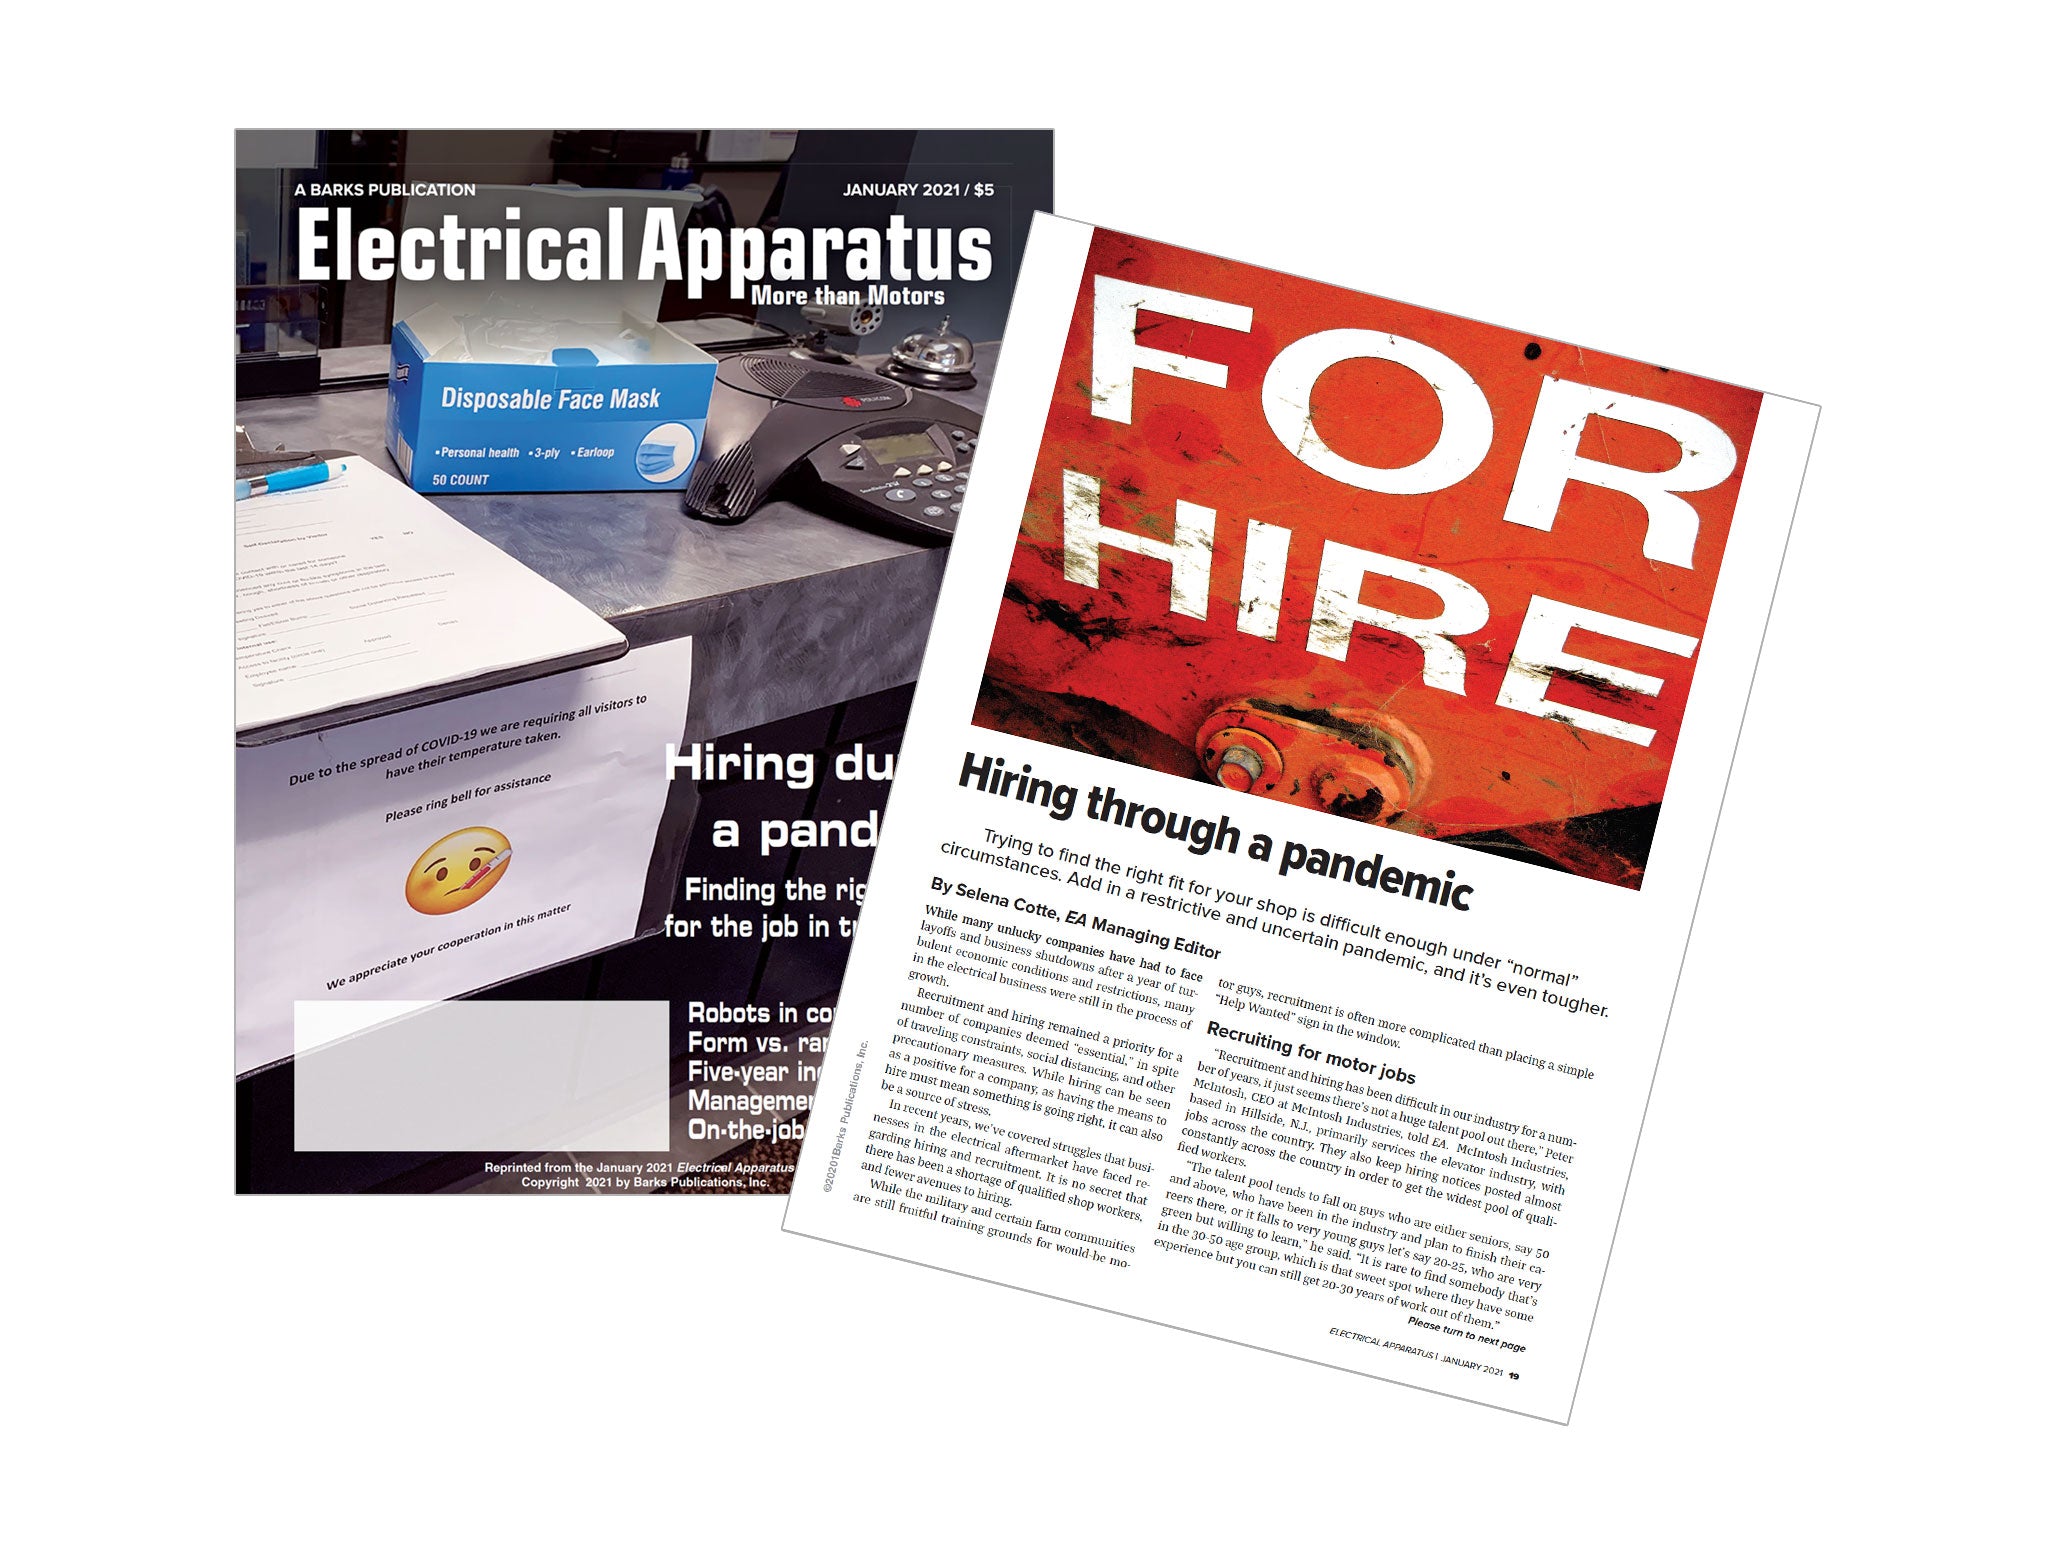 LEI Featured in Electrical Apparatus Magazine - "Hiring During a Pandemic".